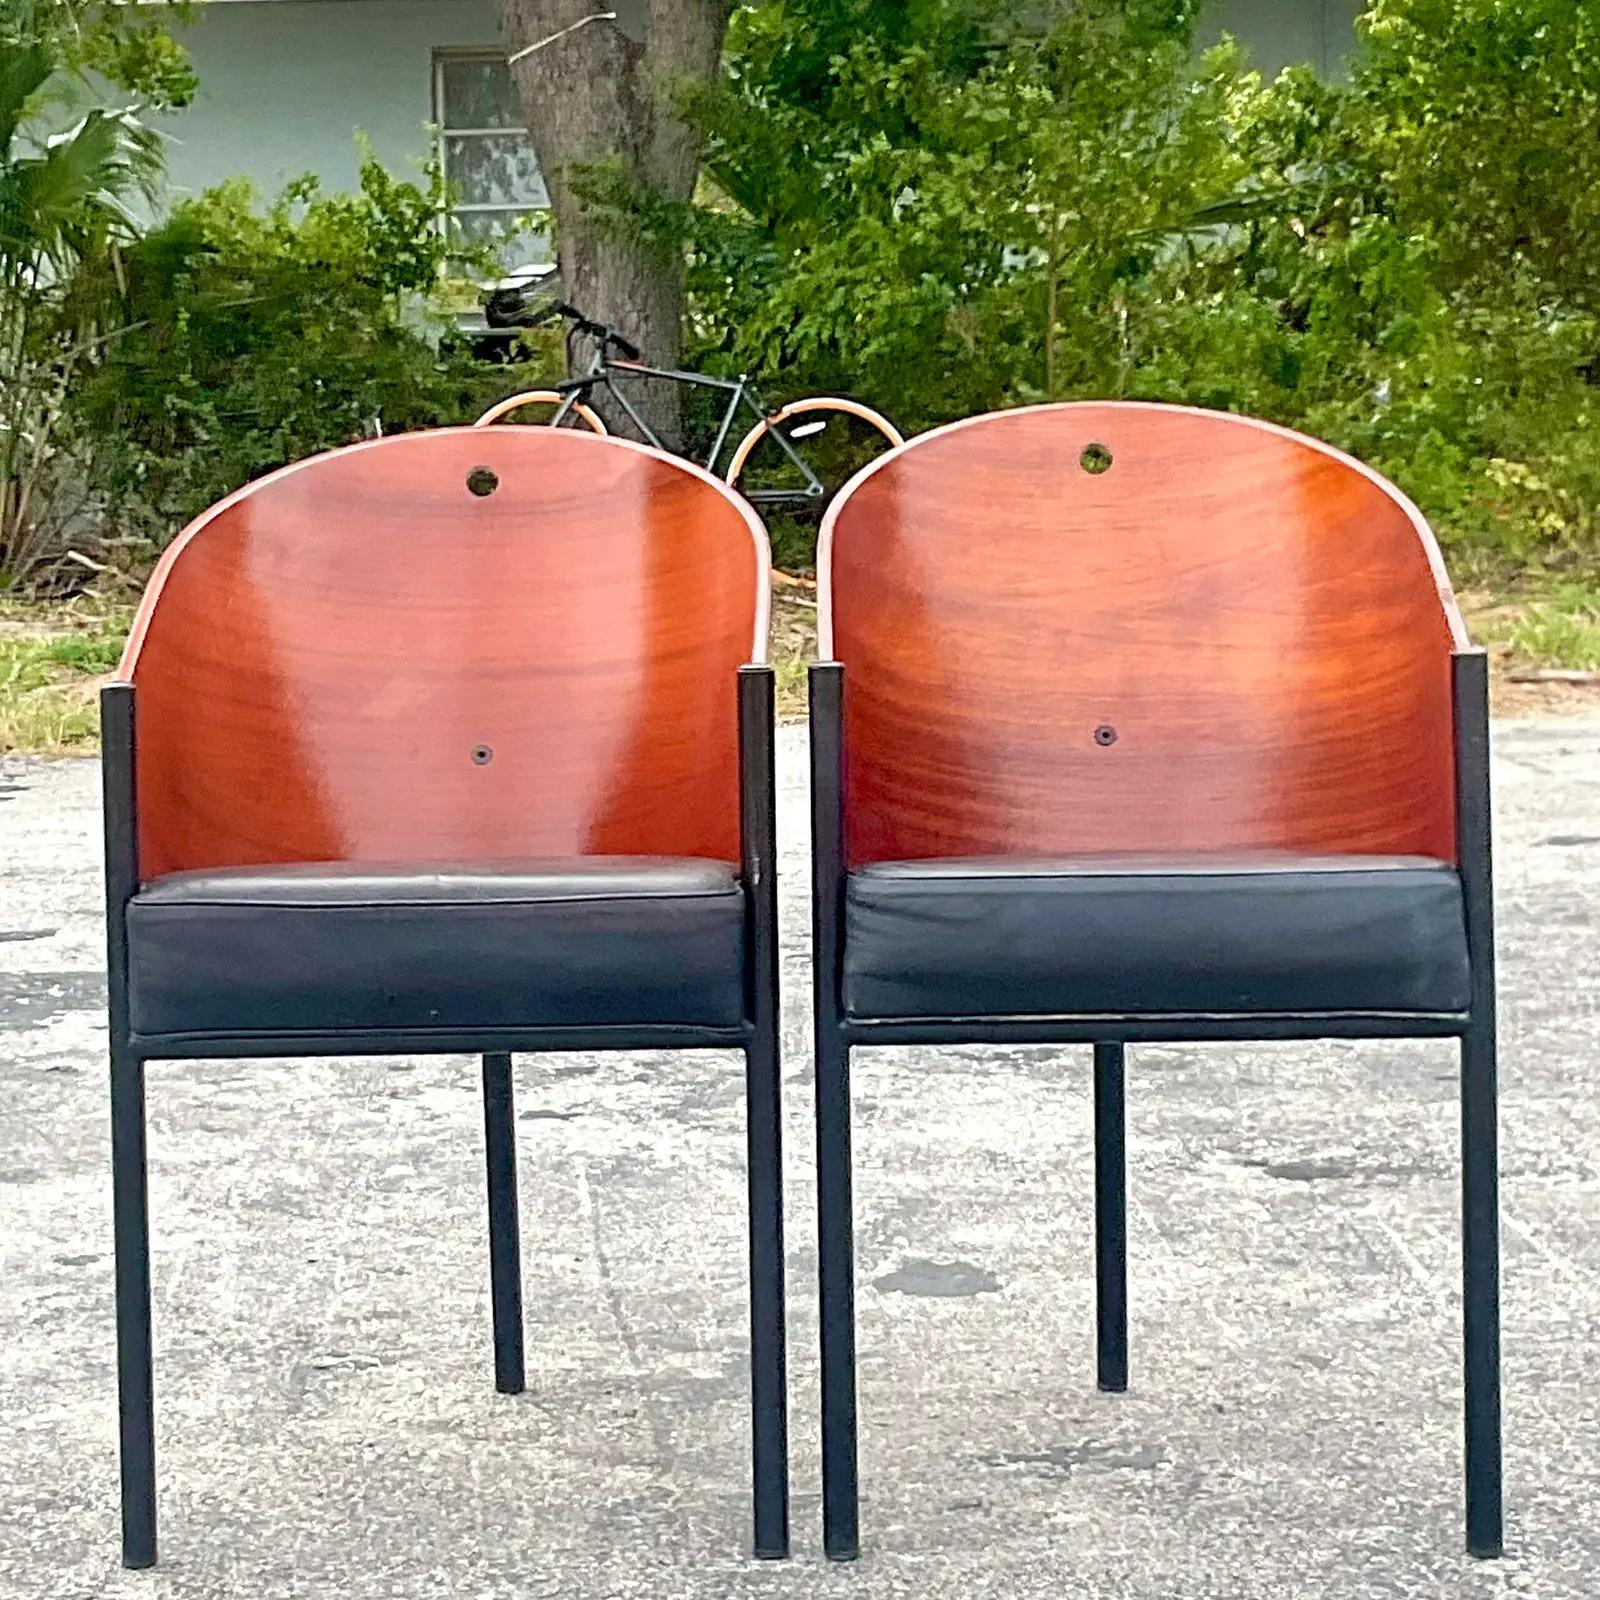 A fabulous pair of vintage Contemporary dining chairs. Chic Mahogany and leather in the iconic shape designed by Phillipe Starck. Immediate adds a flash of glamour to any space. Acquired from a Palm Beach estate. 